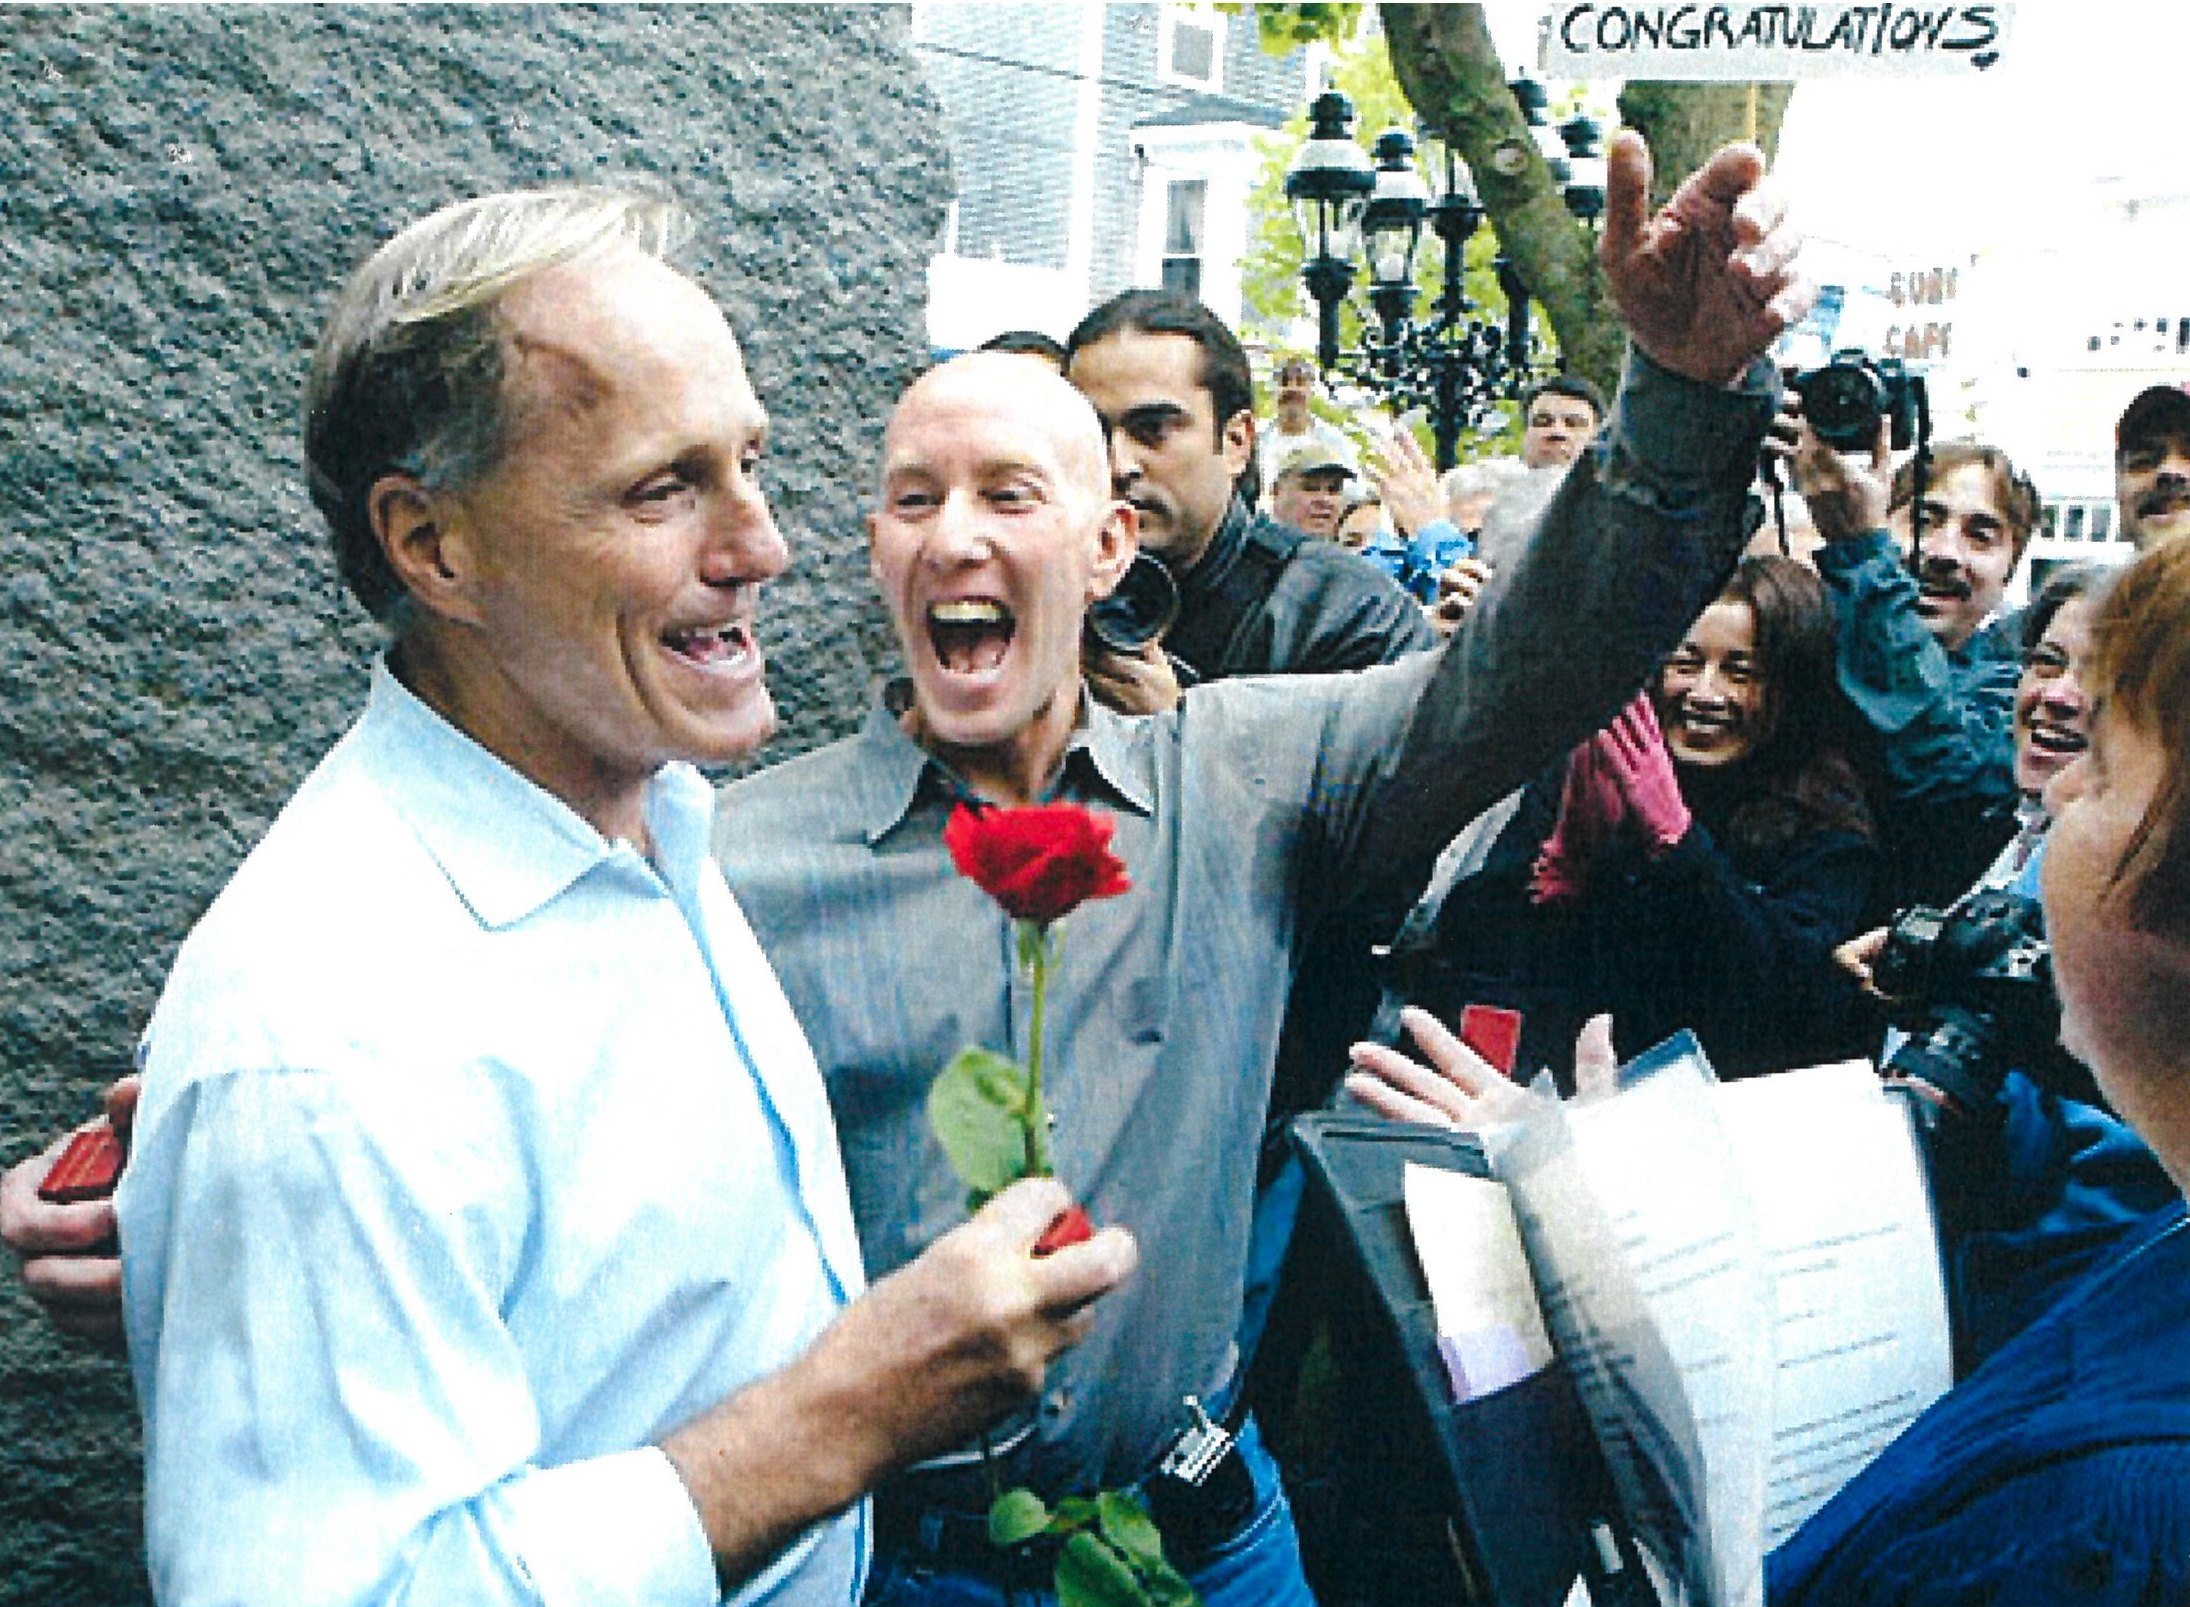 Celebration of a gay wedding after same-sex marriage